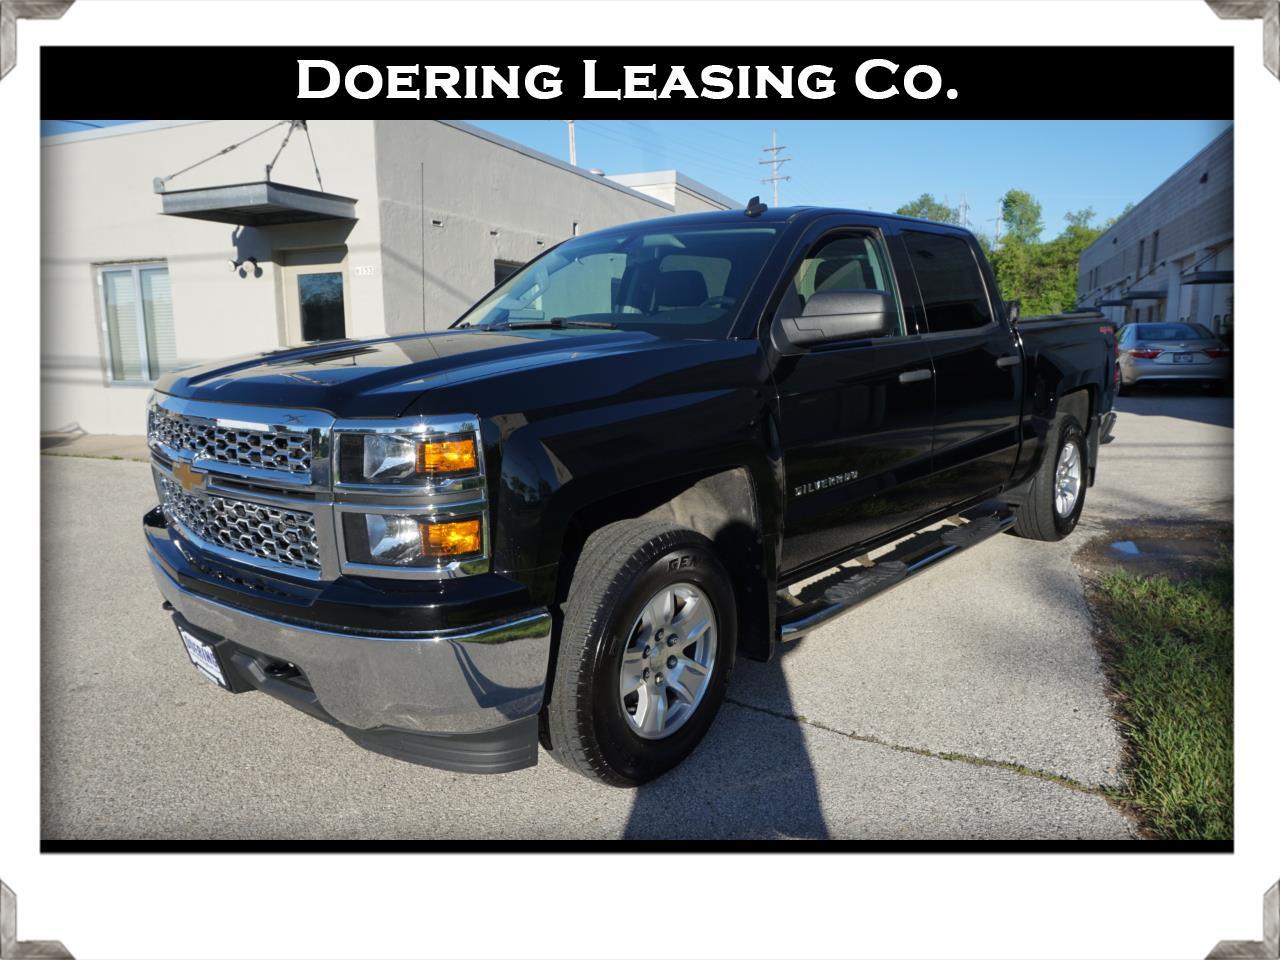 Used 14 Chevrolet Silverado 1500 2lt Crew Cab Long Box 4wd For Sale In Milwaukee Wi Doering Leasing Co